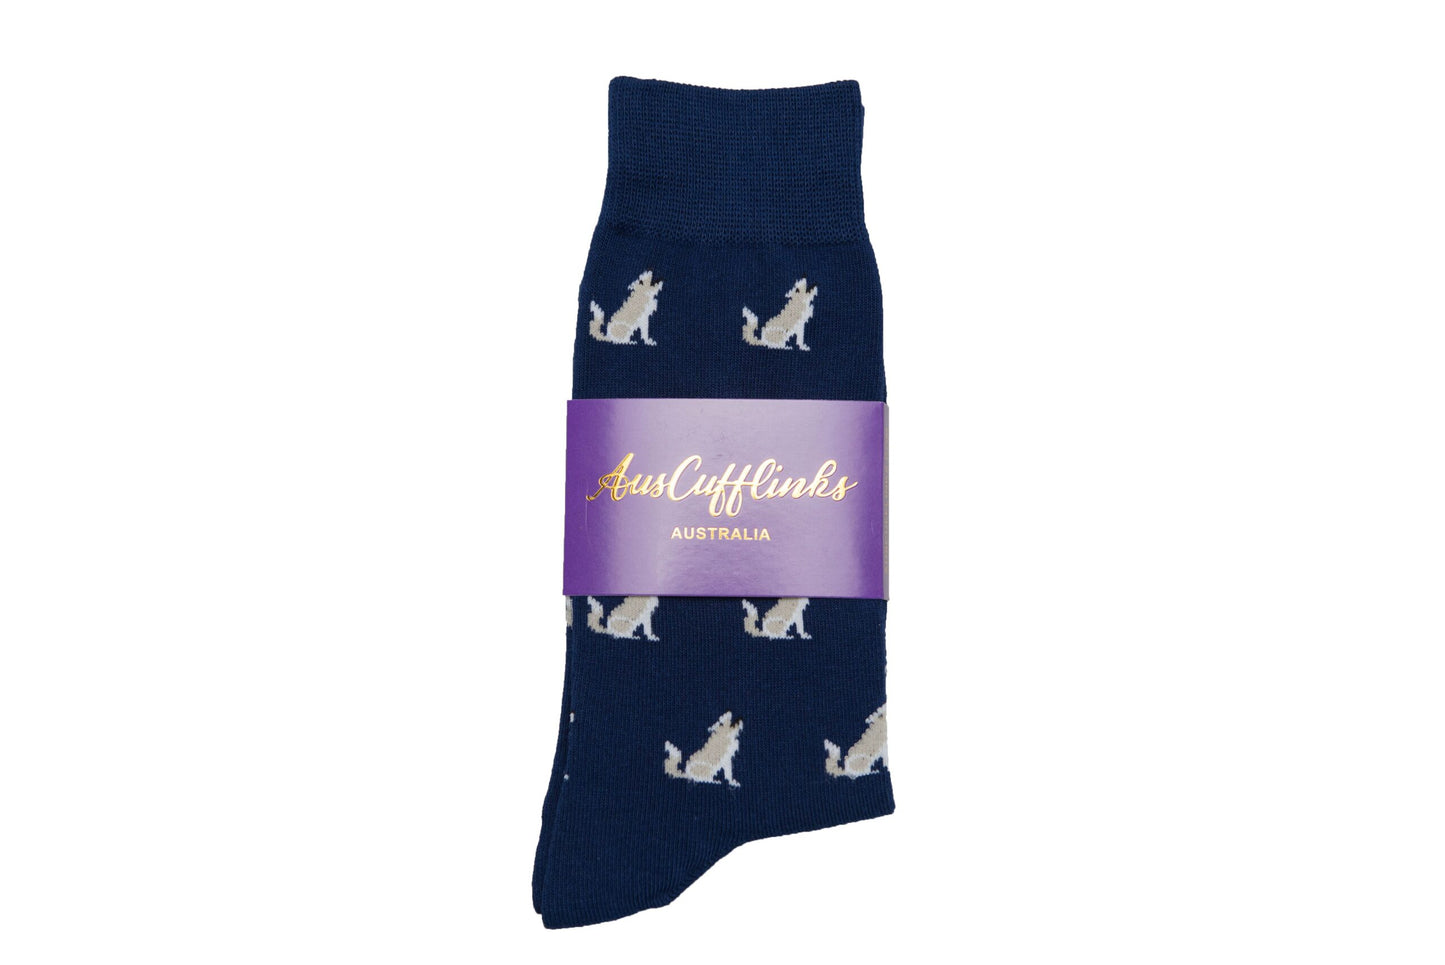 Wolf Socks with white kangaroo pattern, designed to lead the pack, and a purple brand label.